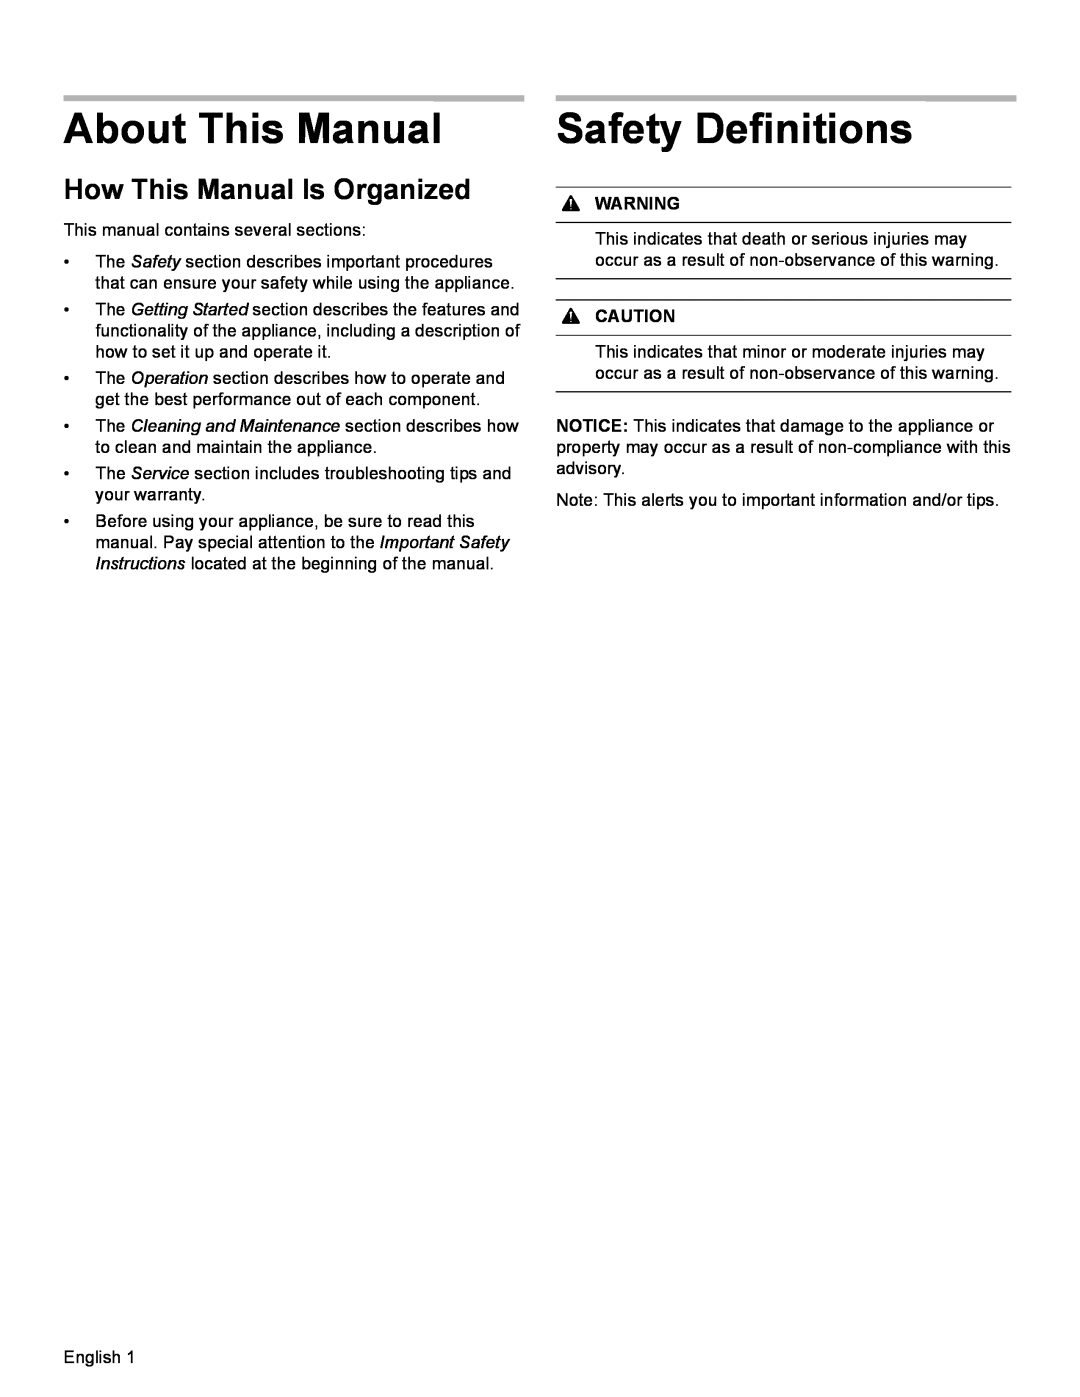 Bosch Appliances HDI8054U manual About This Manual, Safety Definitions, How This Manual Is Organized, Warning, Caution 